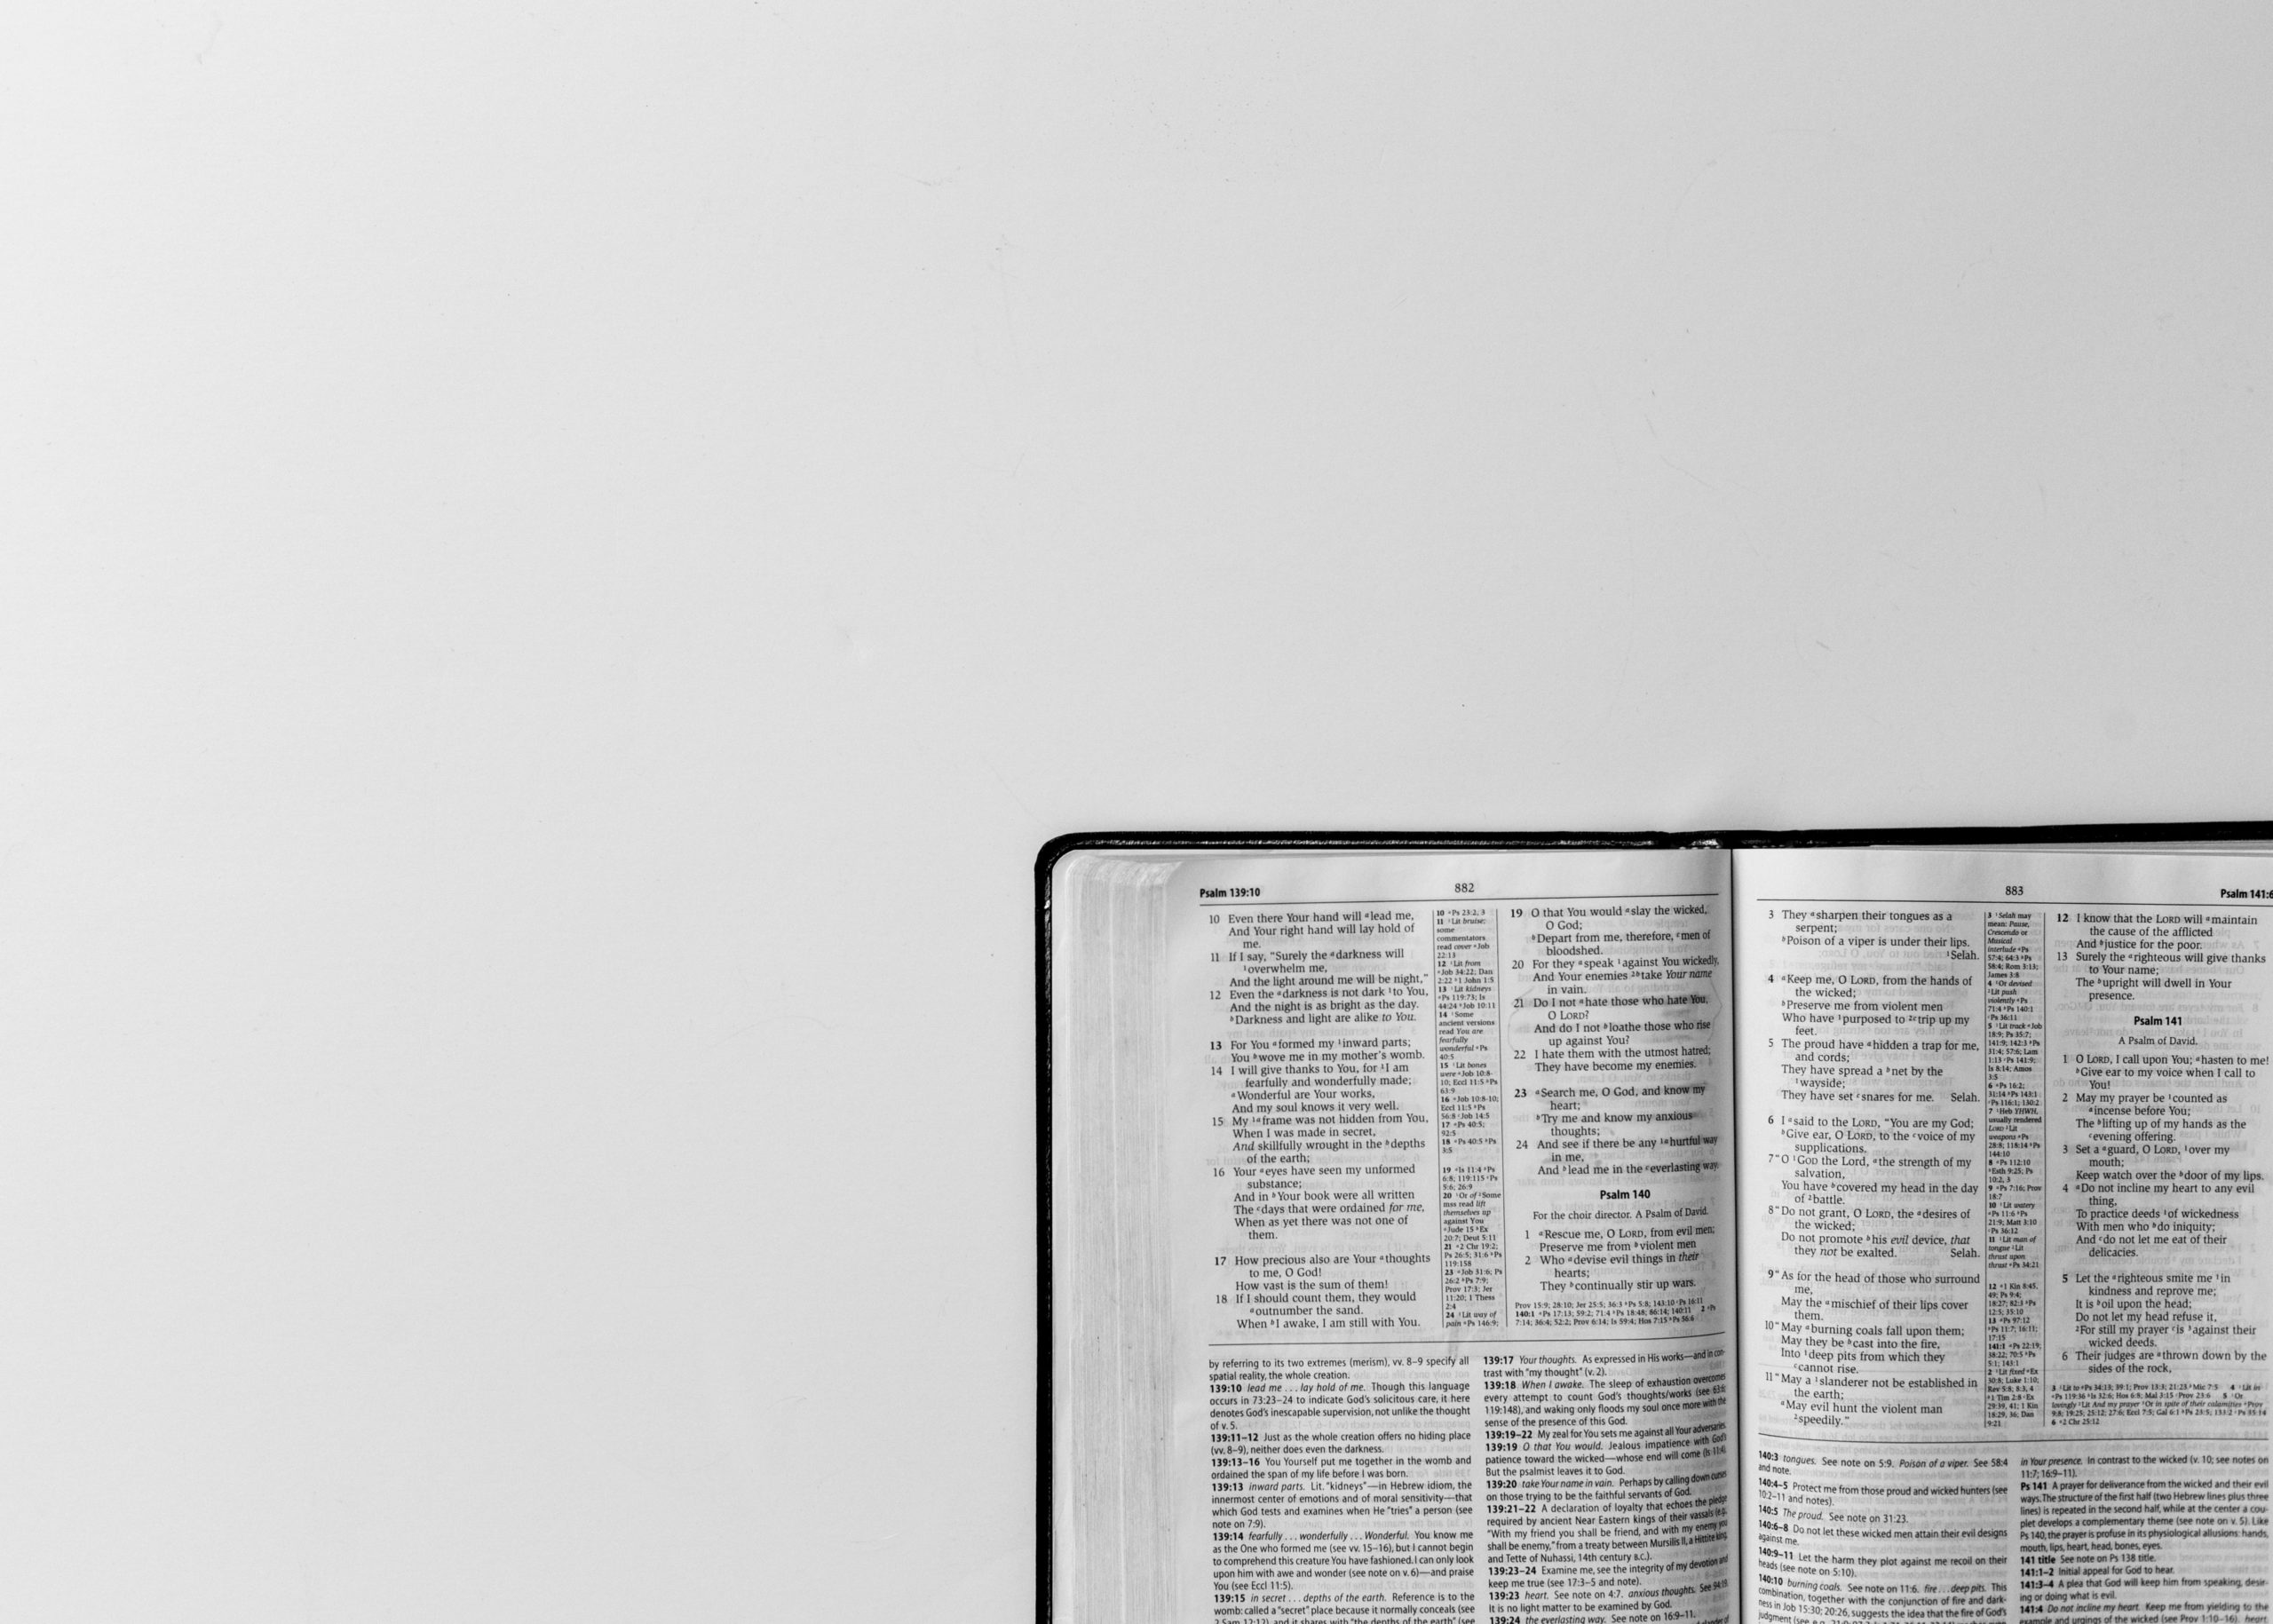 A Bible lies open in the corner of a white background.